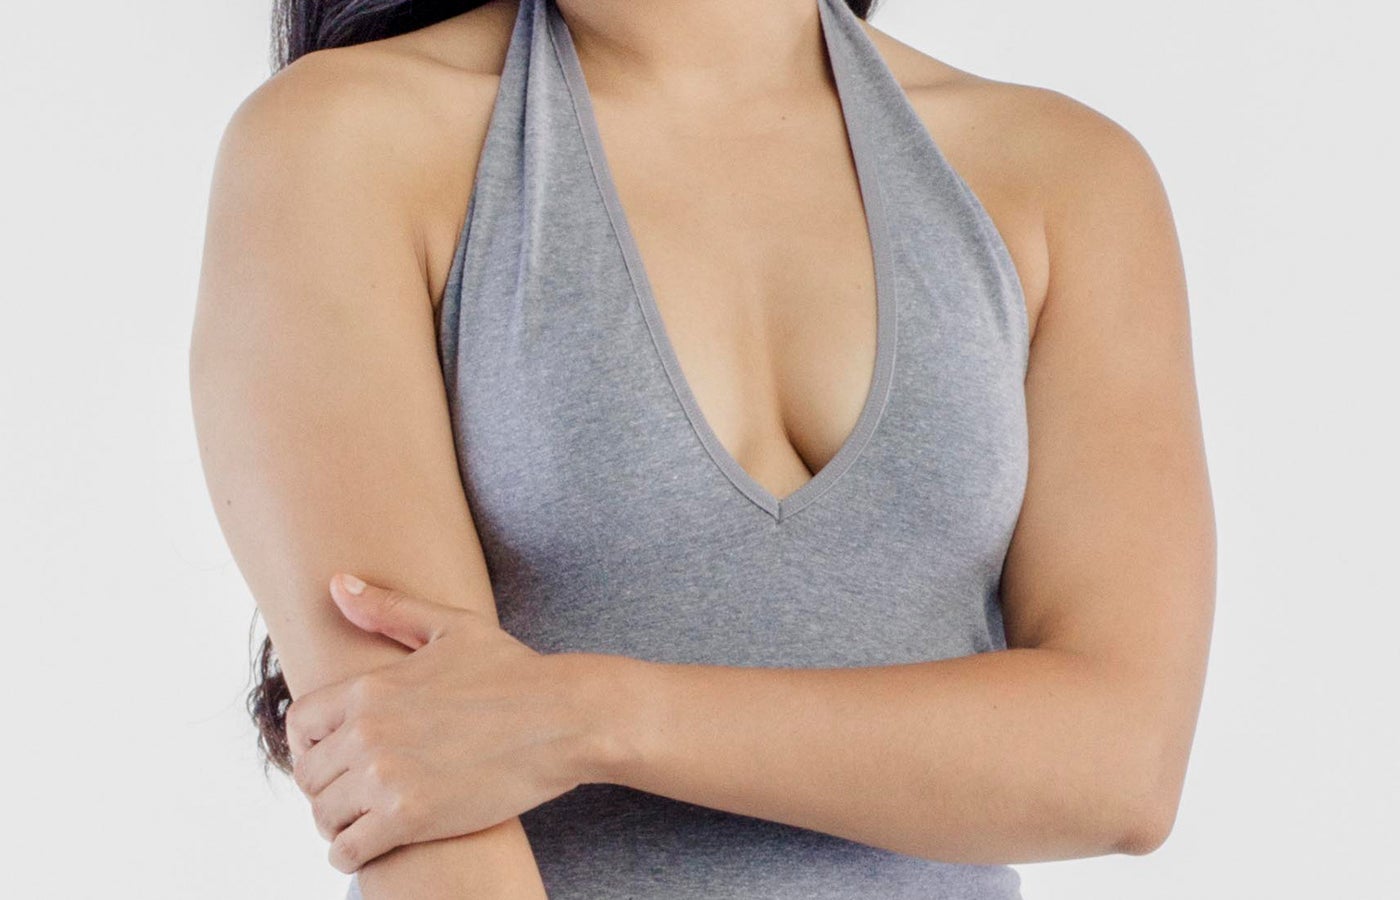 Can A Breast Reduction Ease My Back Pain? - Stephens Plastic Surgery